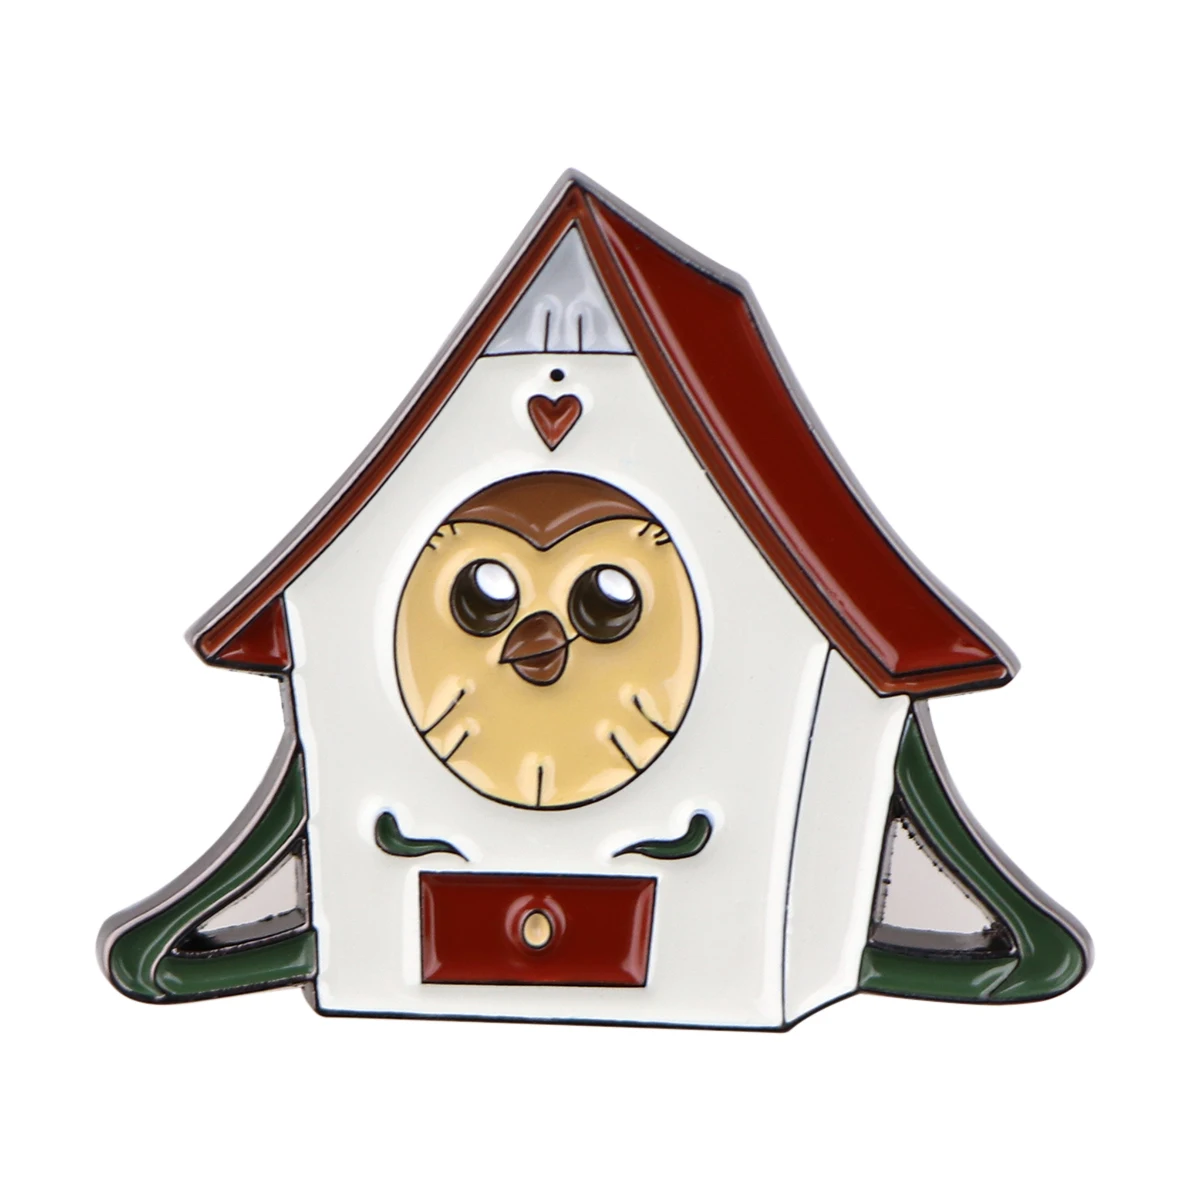 

Cartoon Owl and House Badge on Backpack Cartoon Enamel Pin Lapel Pins Brooch for Clothes Cosplay Accessories Gifts for Kids Toys